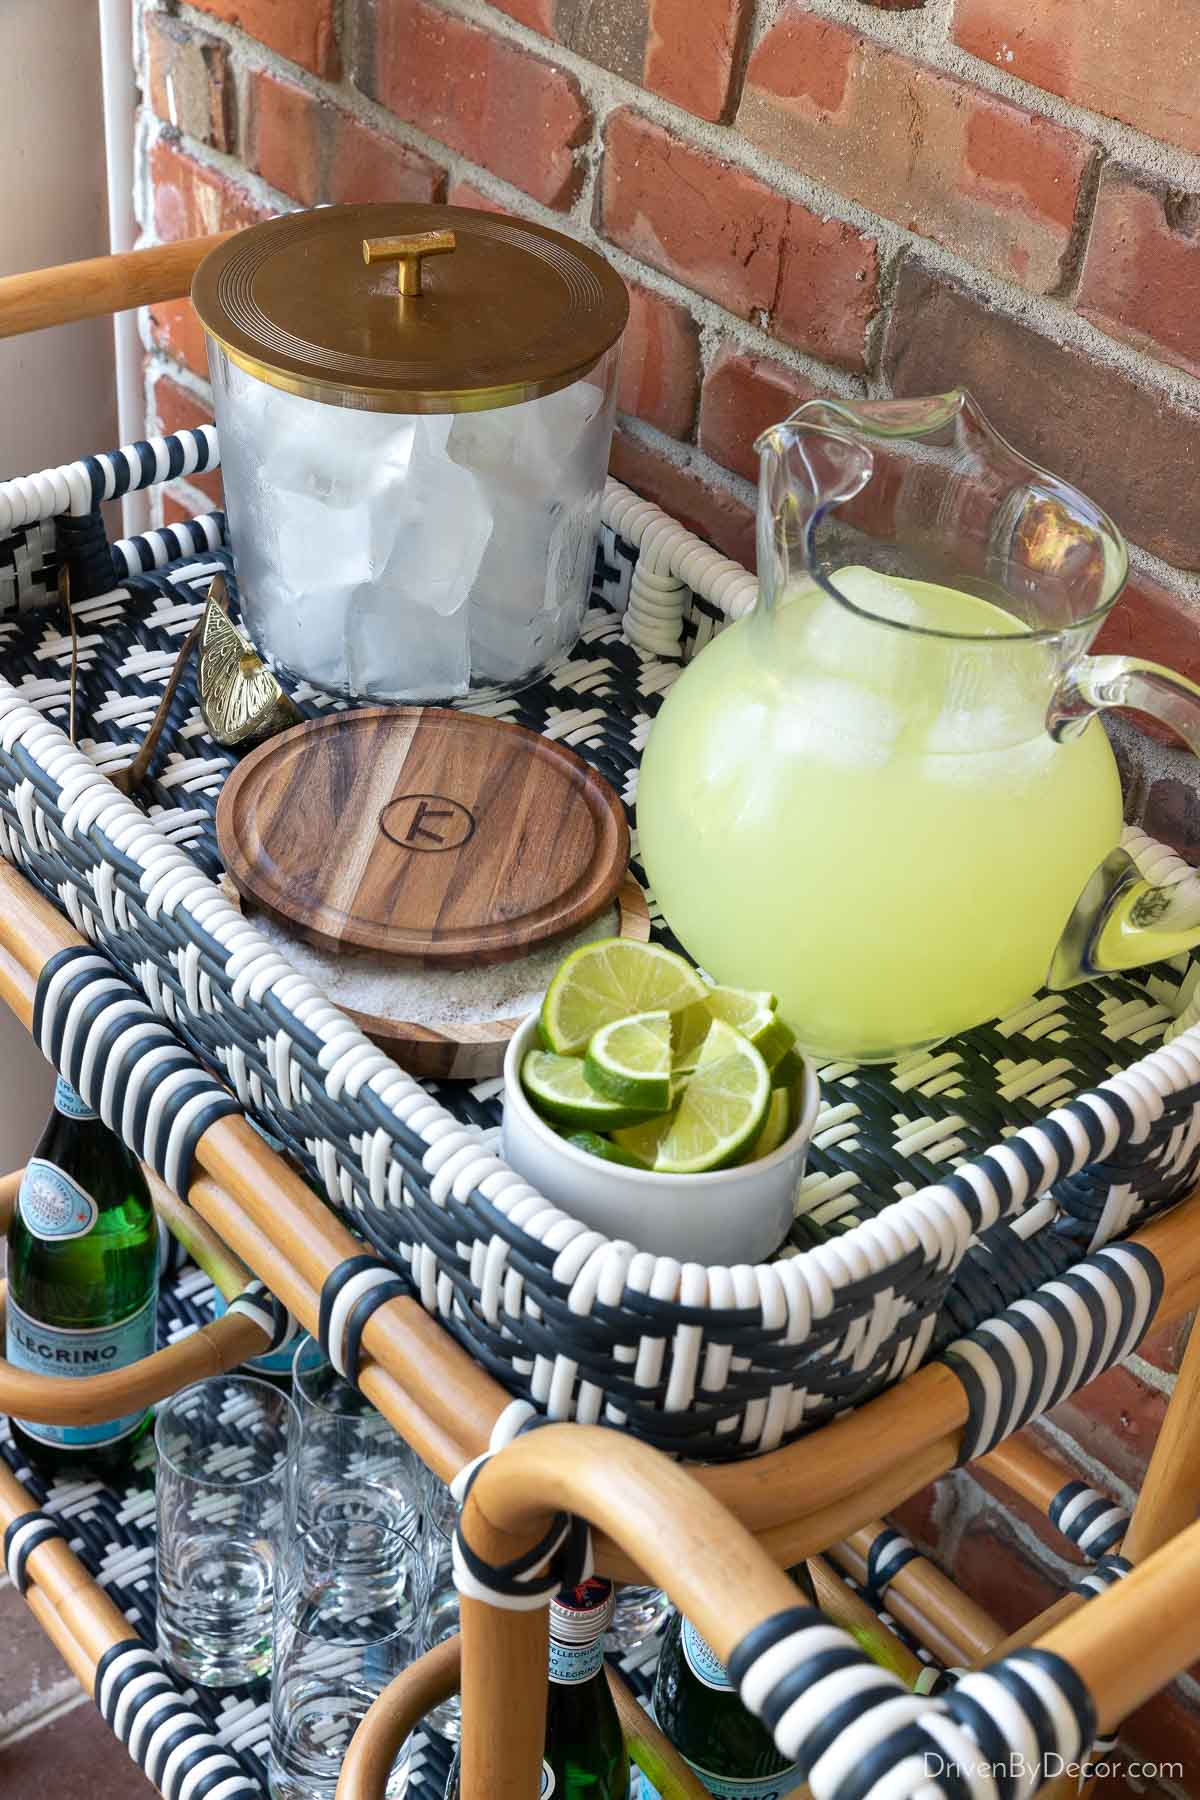 Tray top of outdoor bar cart for entertaining